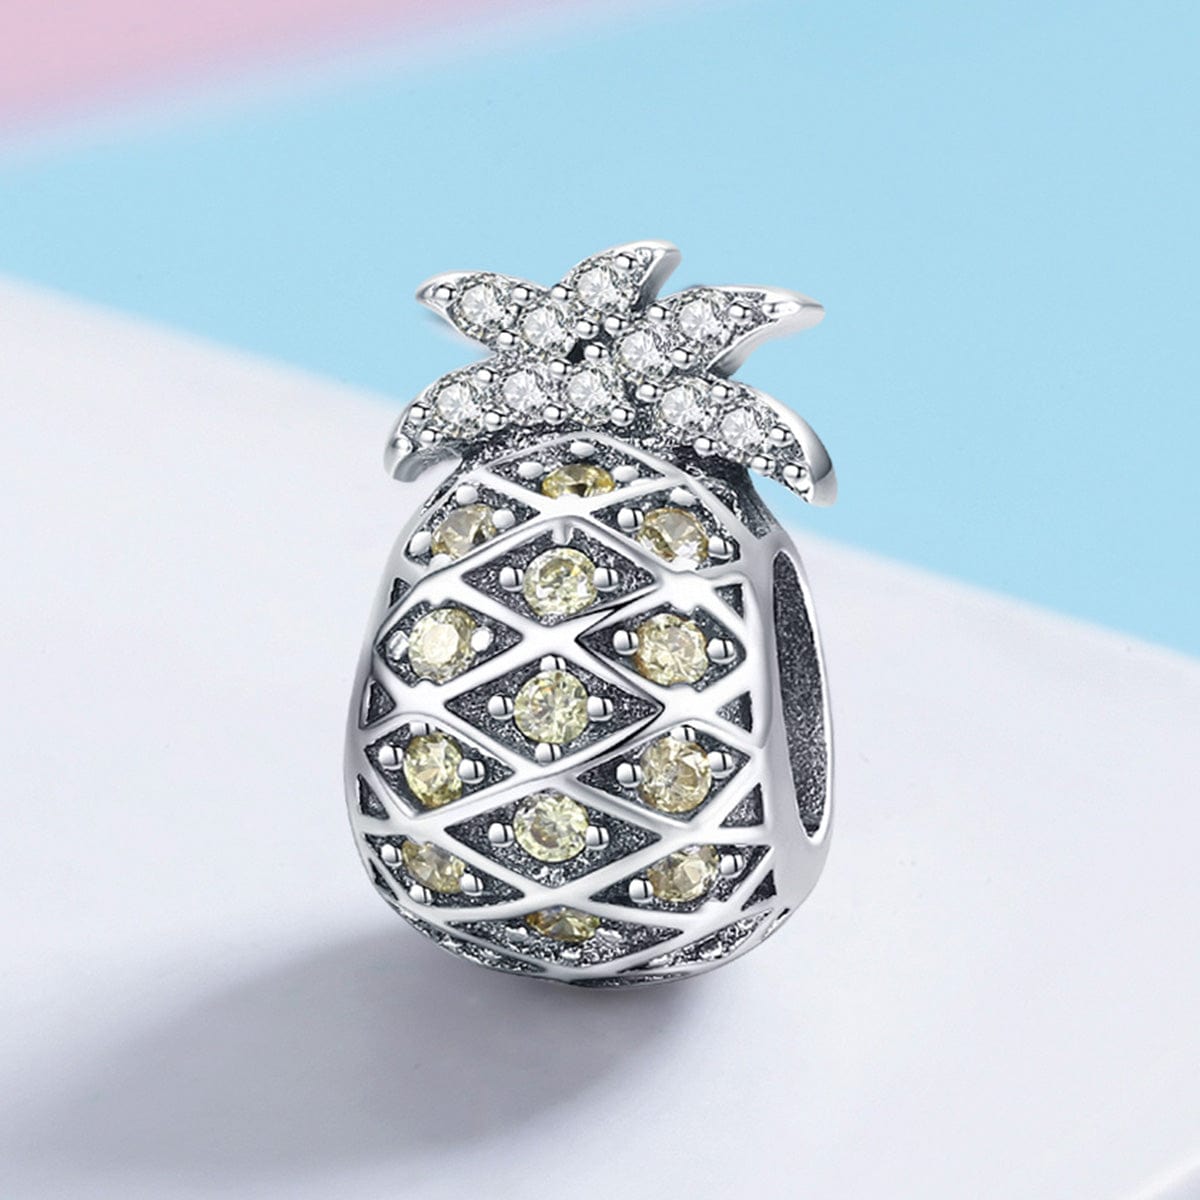 shipped in AUS CHARMS Pineapple Charm